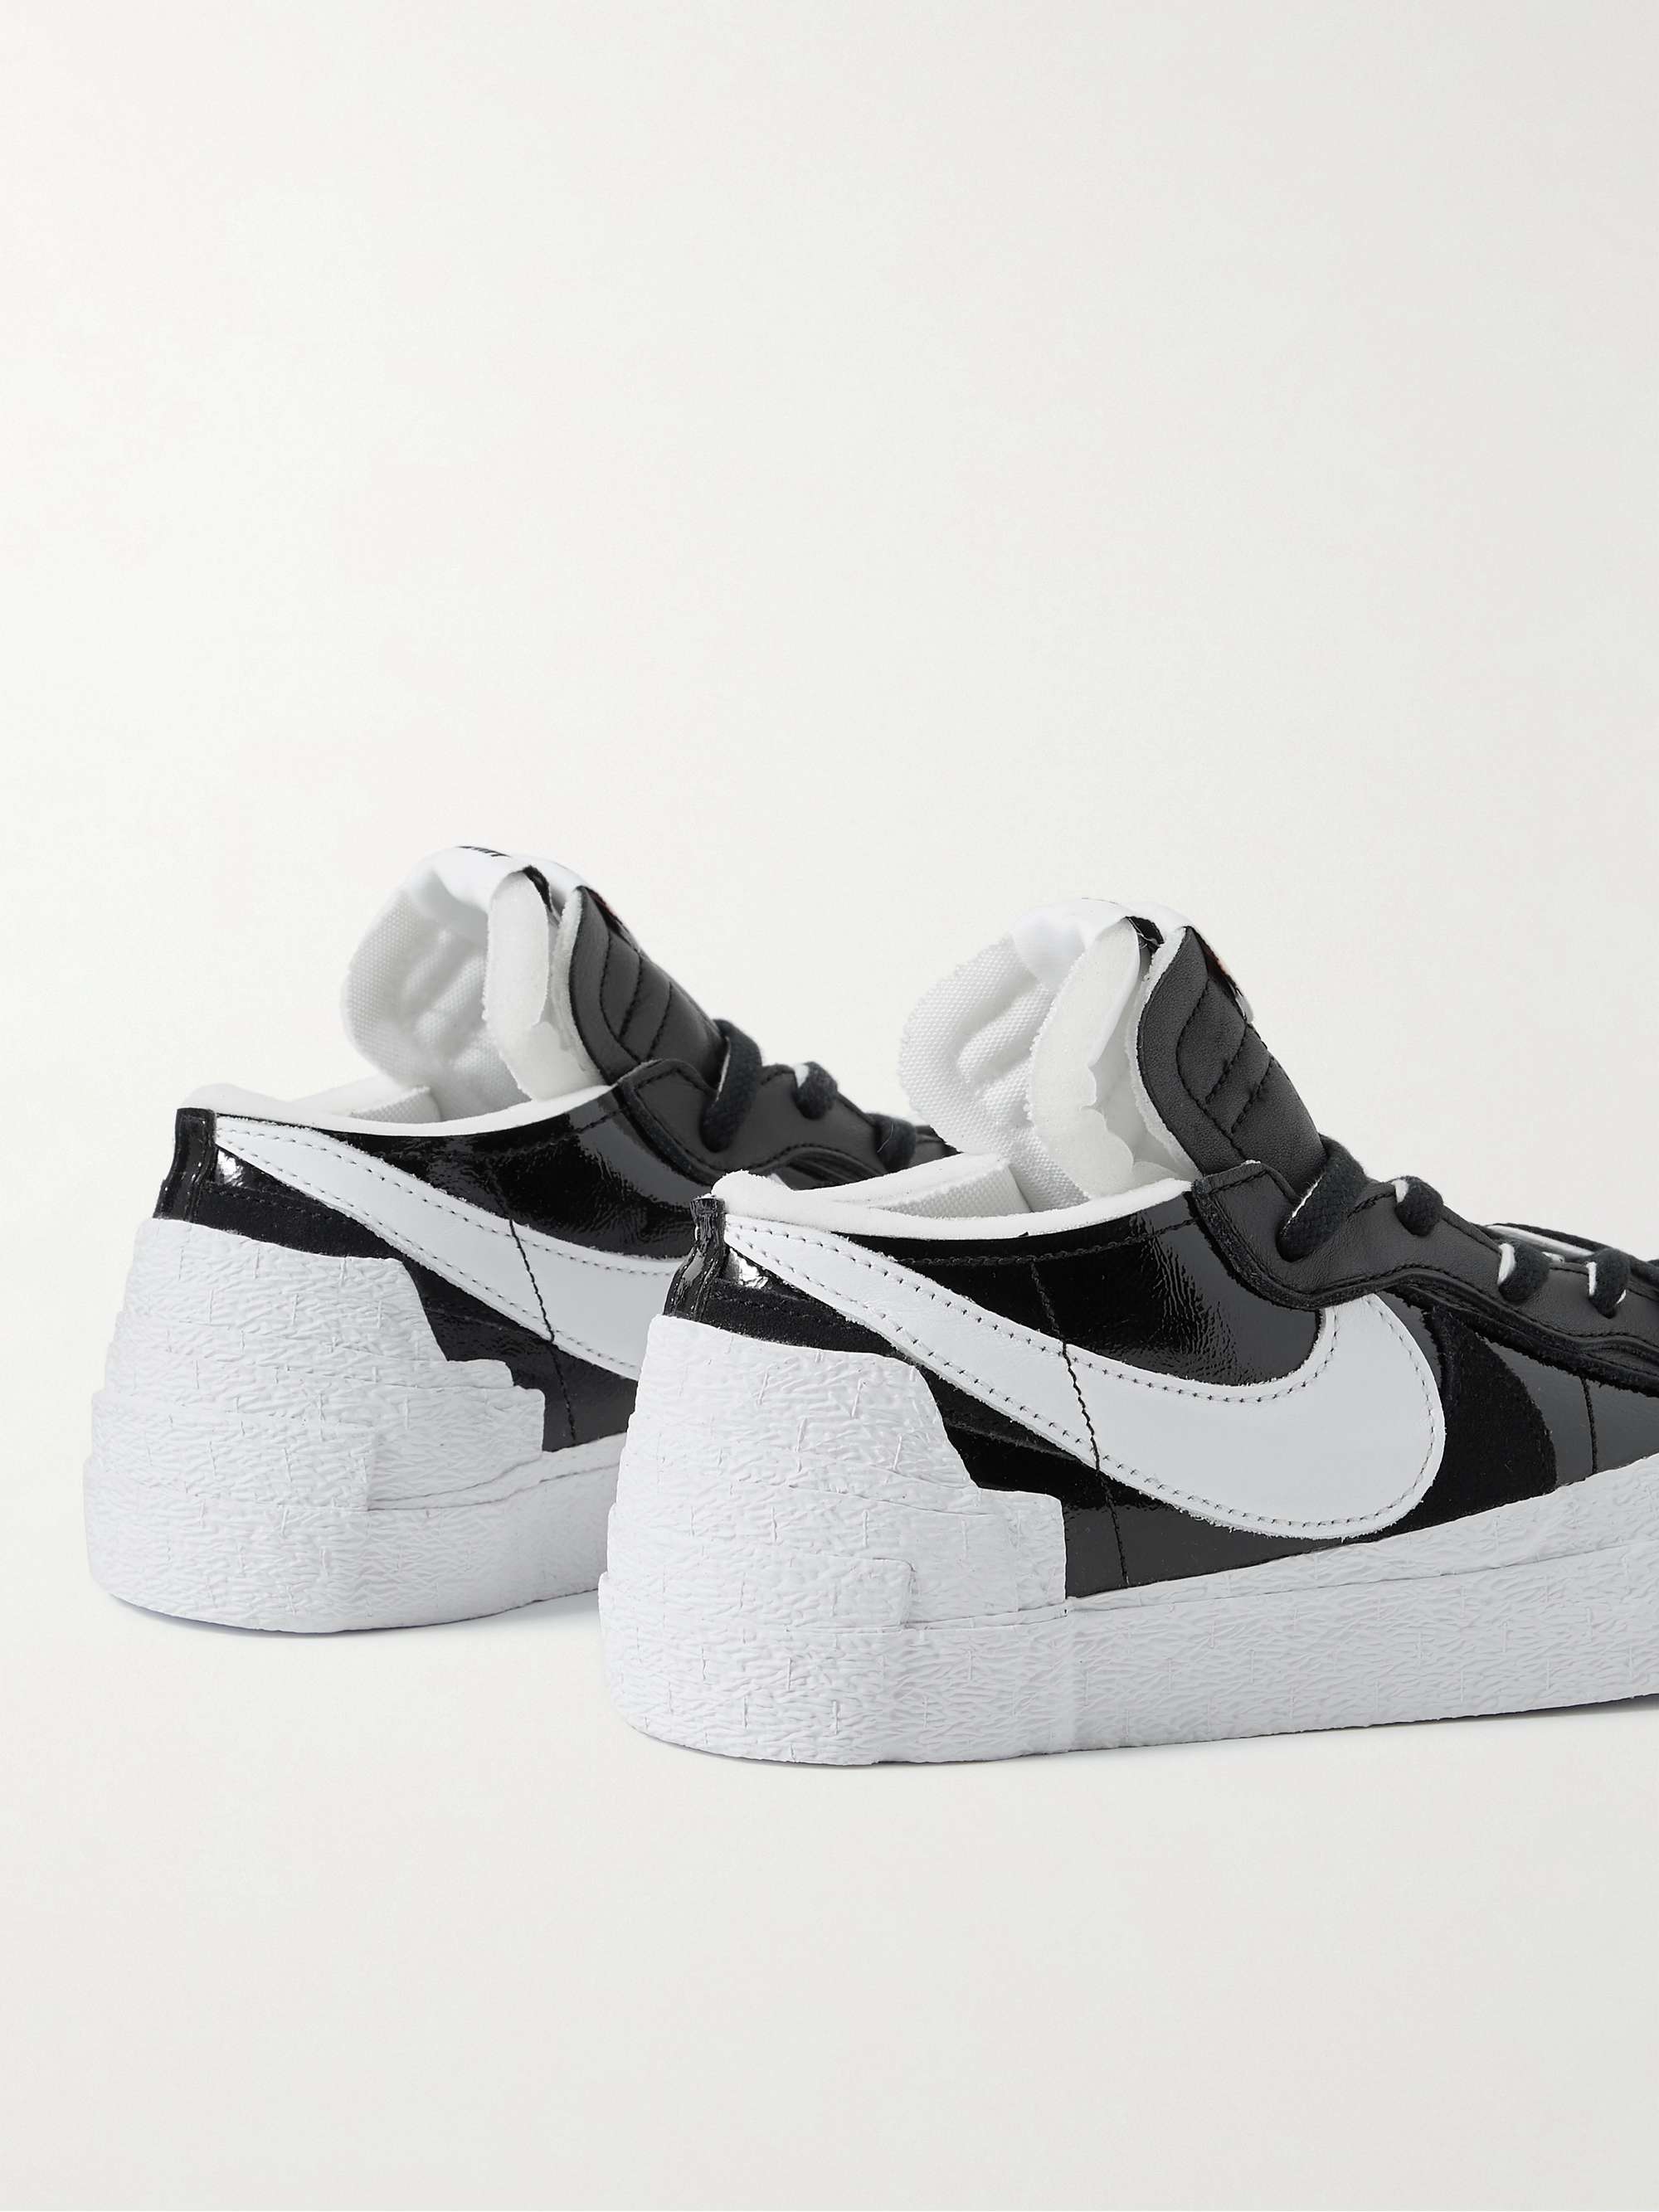 NIKE + Sacai Blazer Low Suede-Trimmed Leather Sneakers